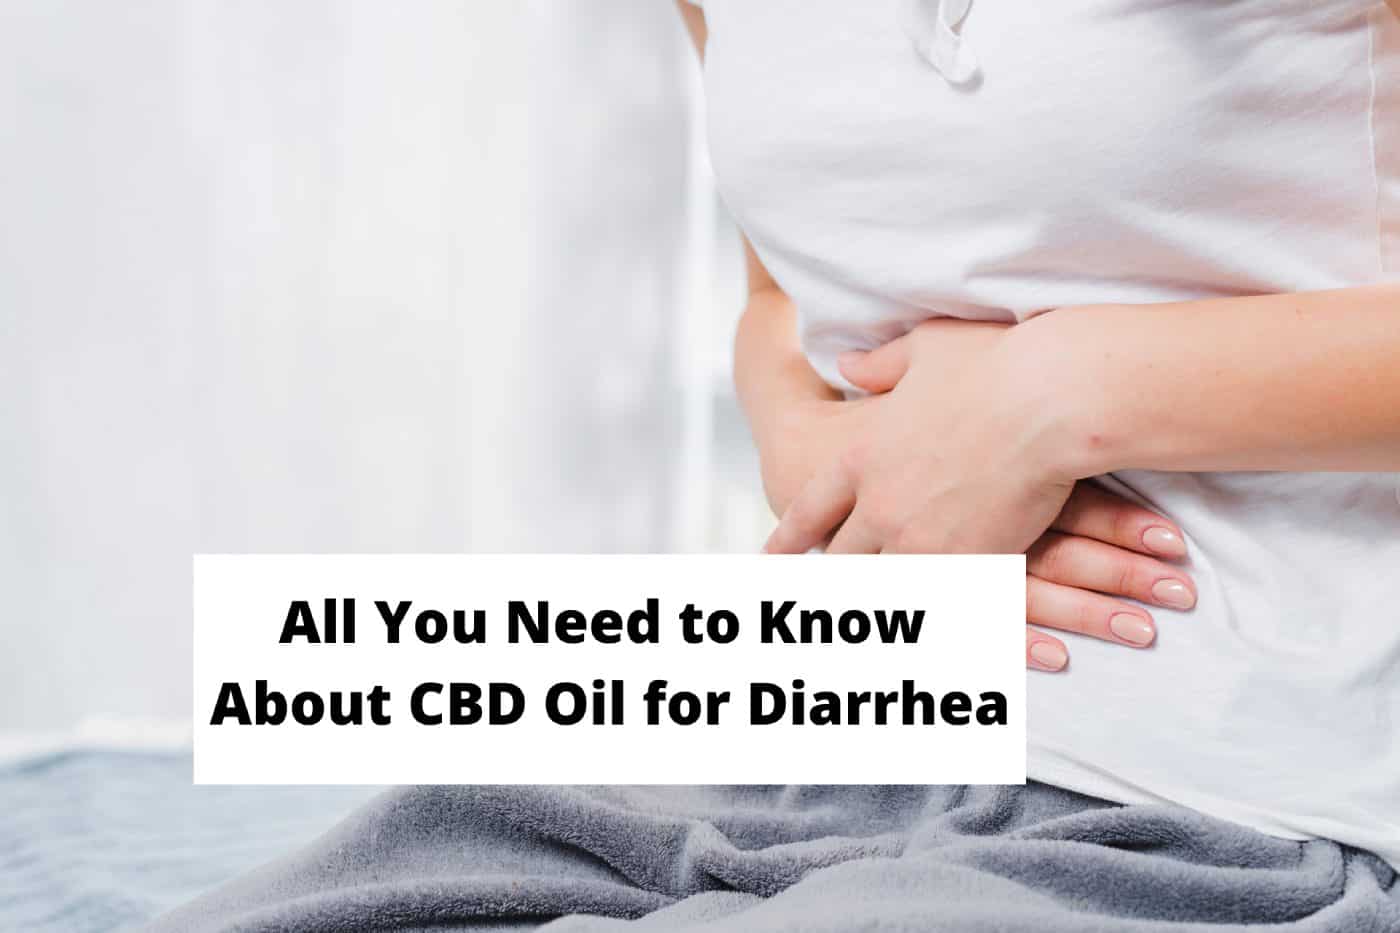 All You Need to Know About CBD Oil for Diarrhea